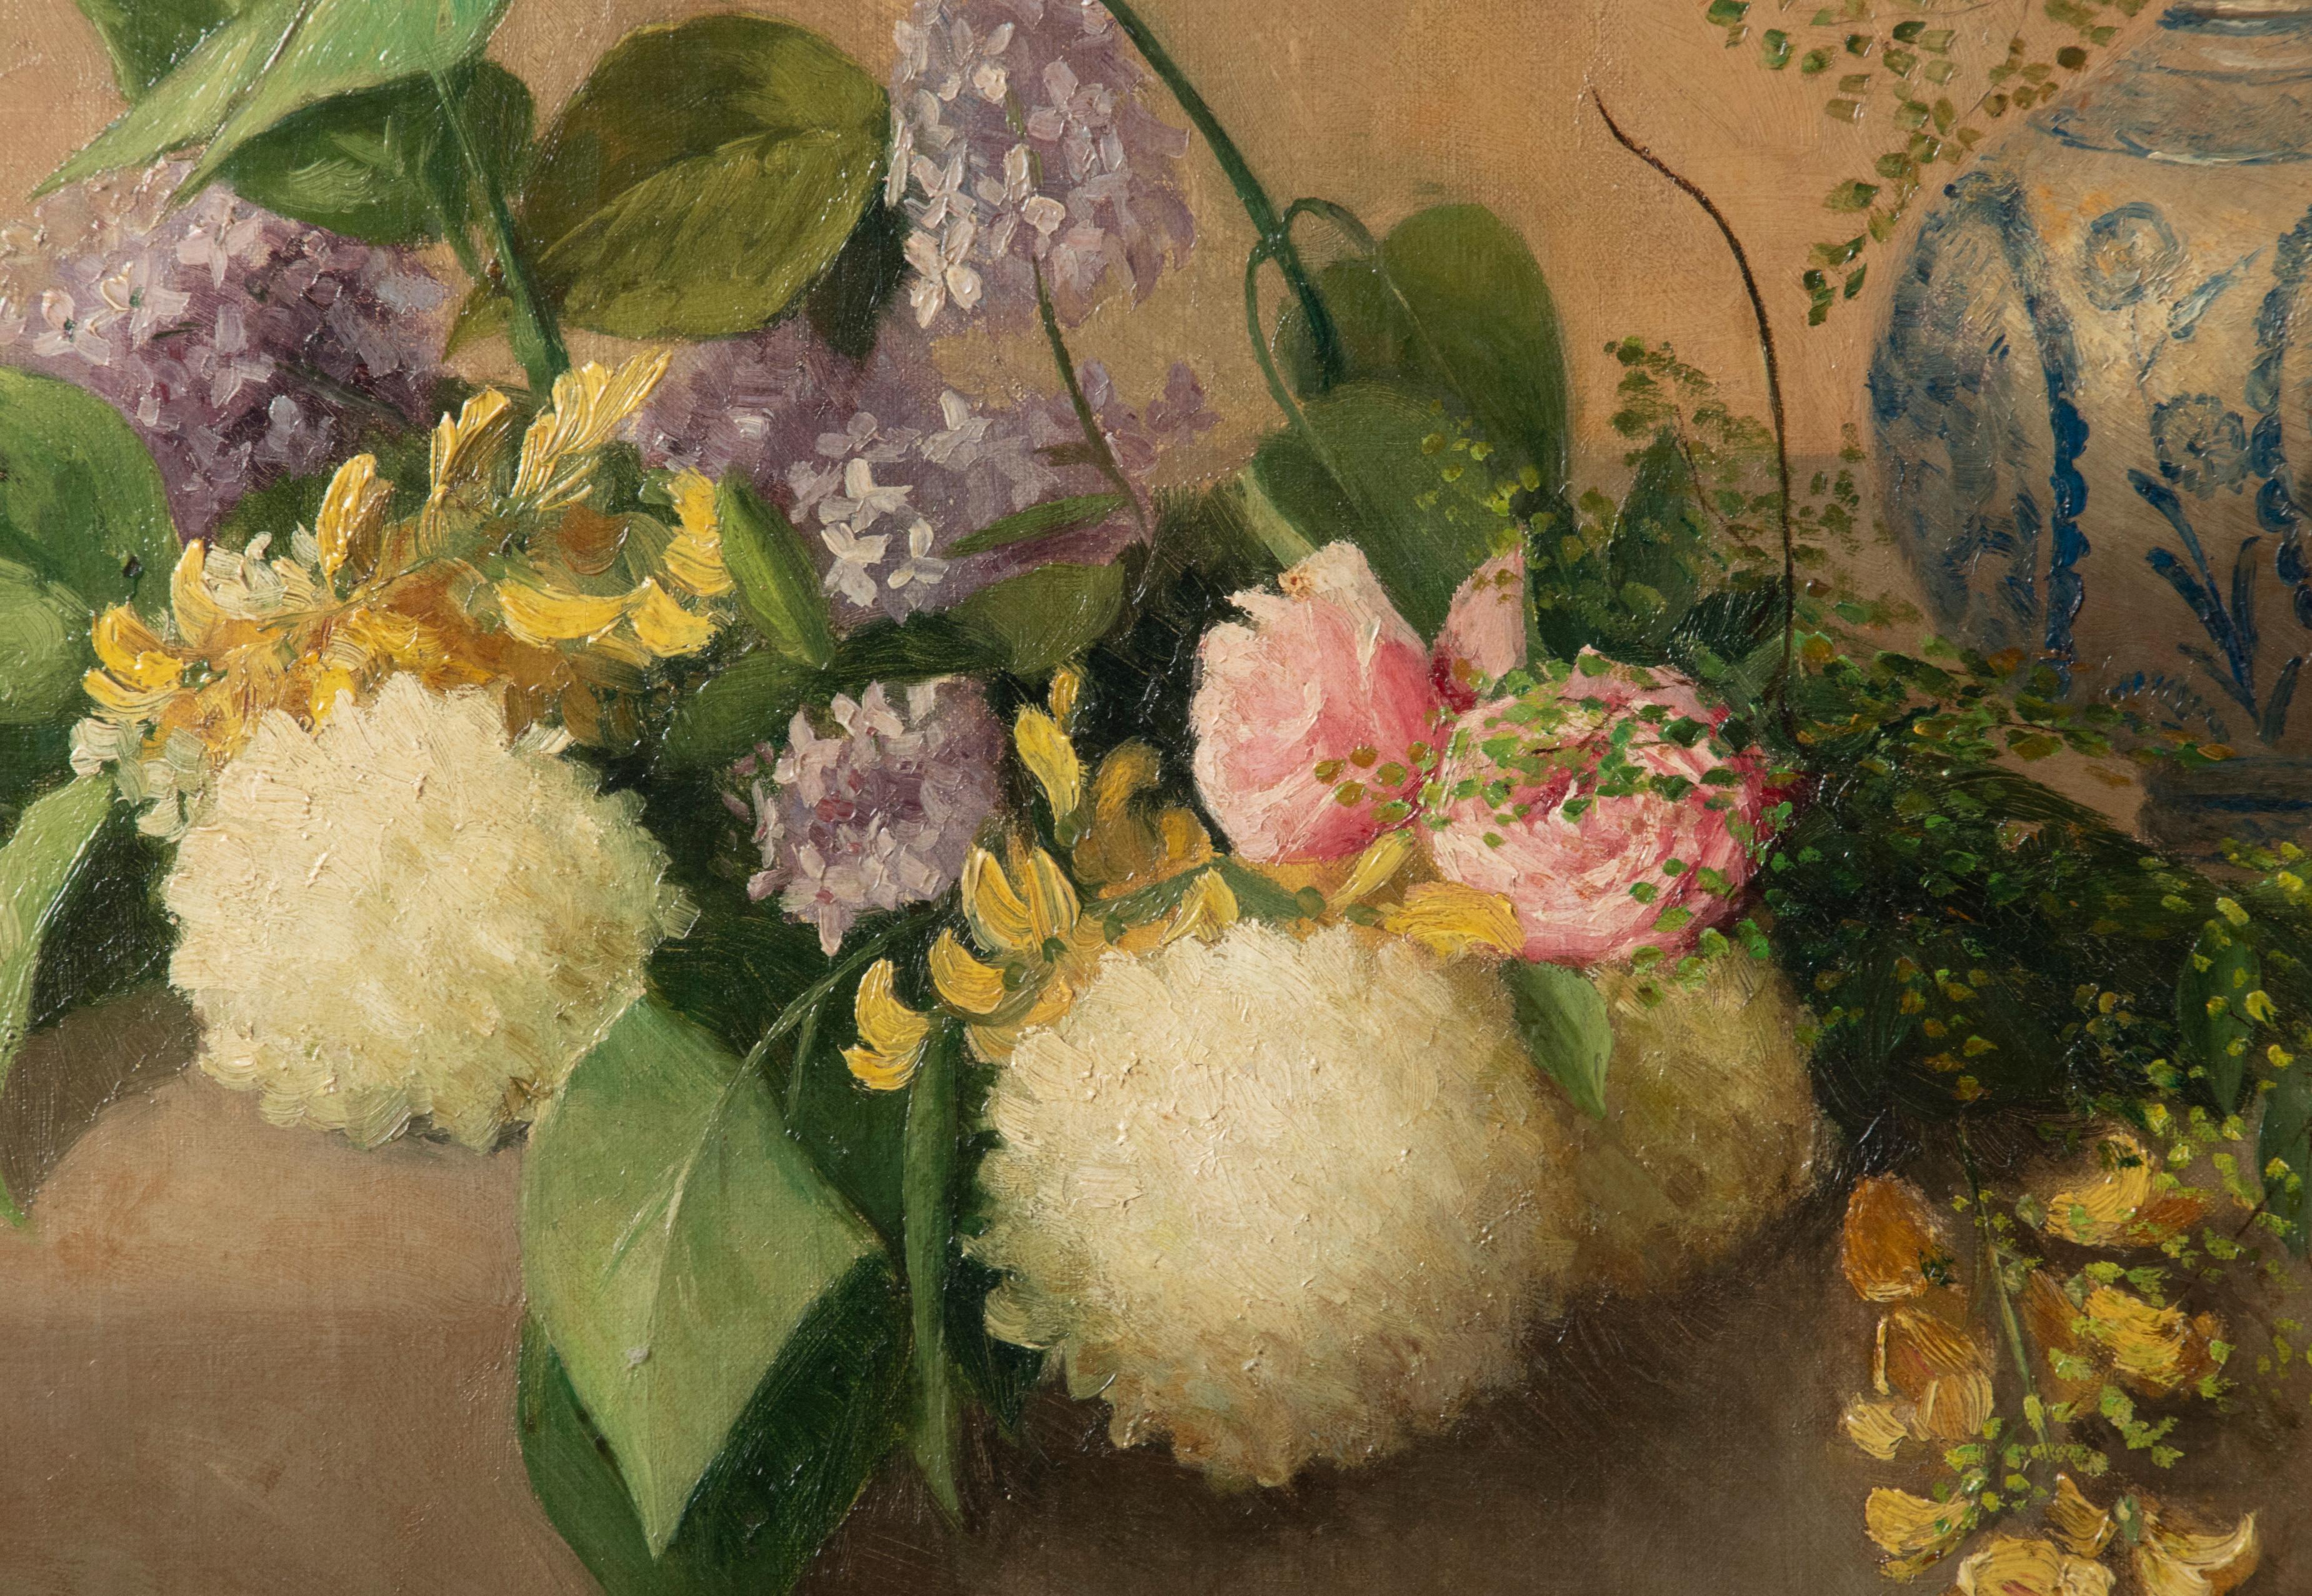 Hand-Painted 19th Century Flower Still Life Painting Oil on Canvas by M. Herwyn